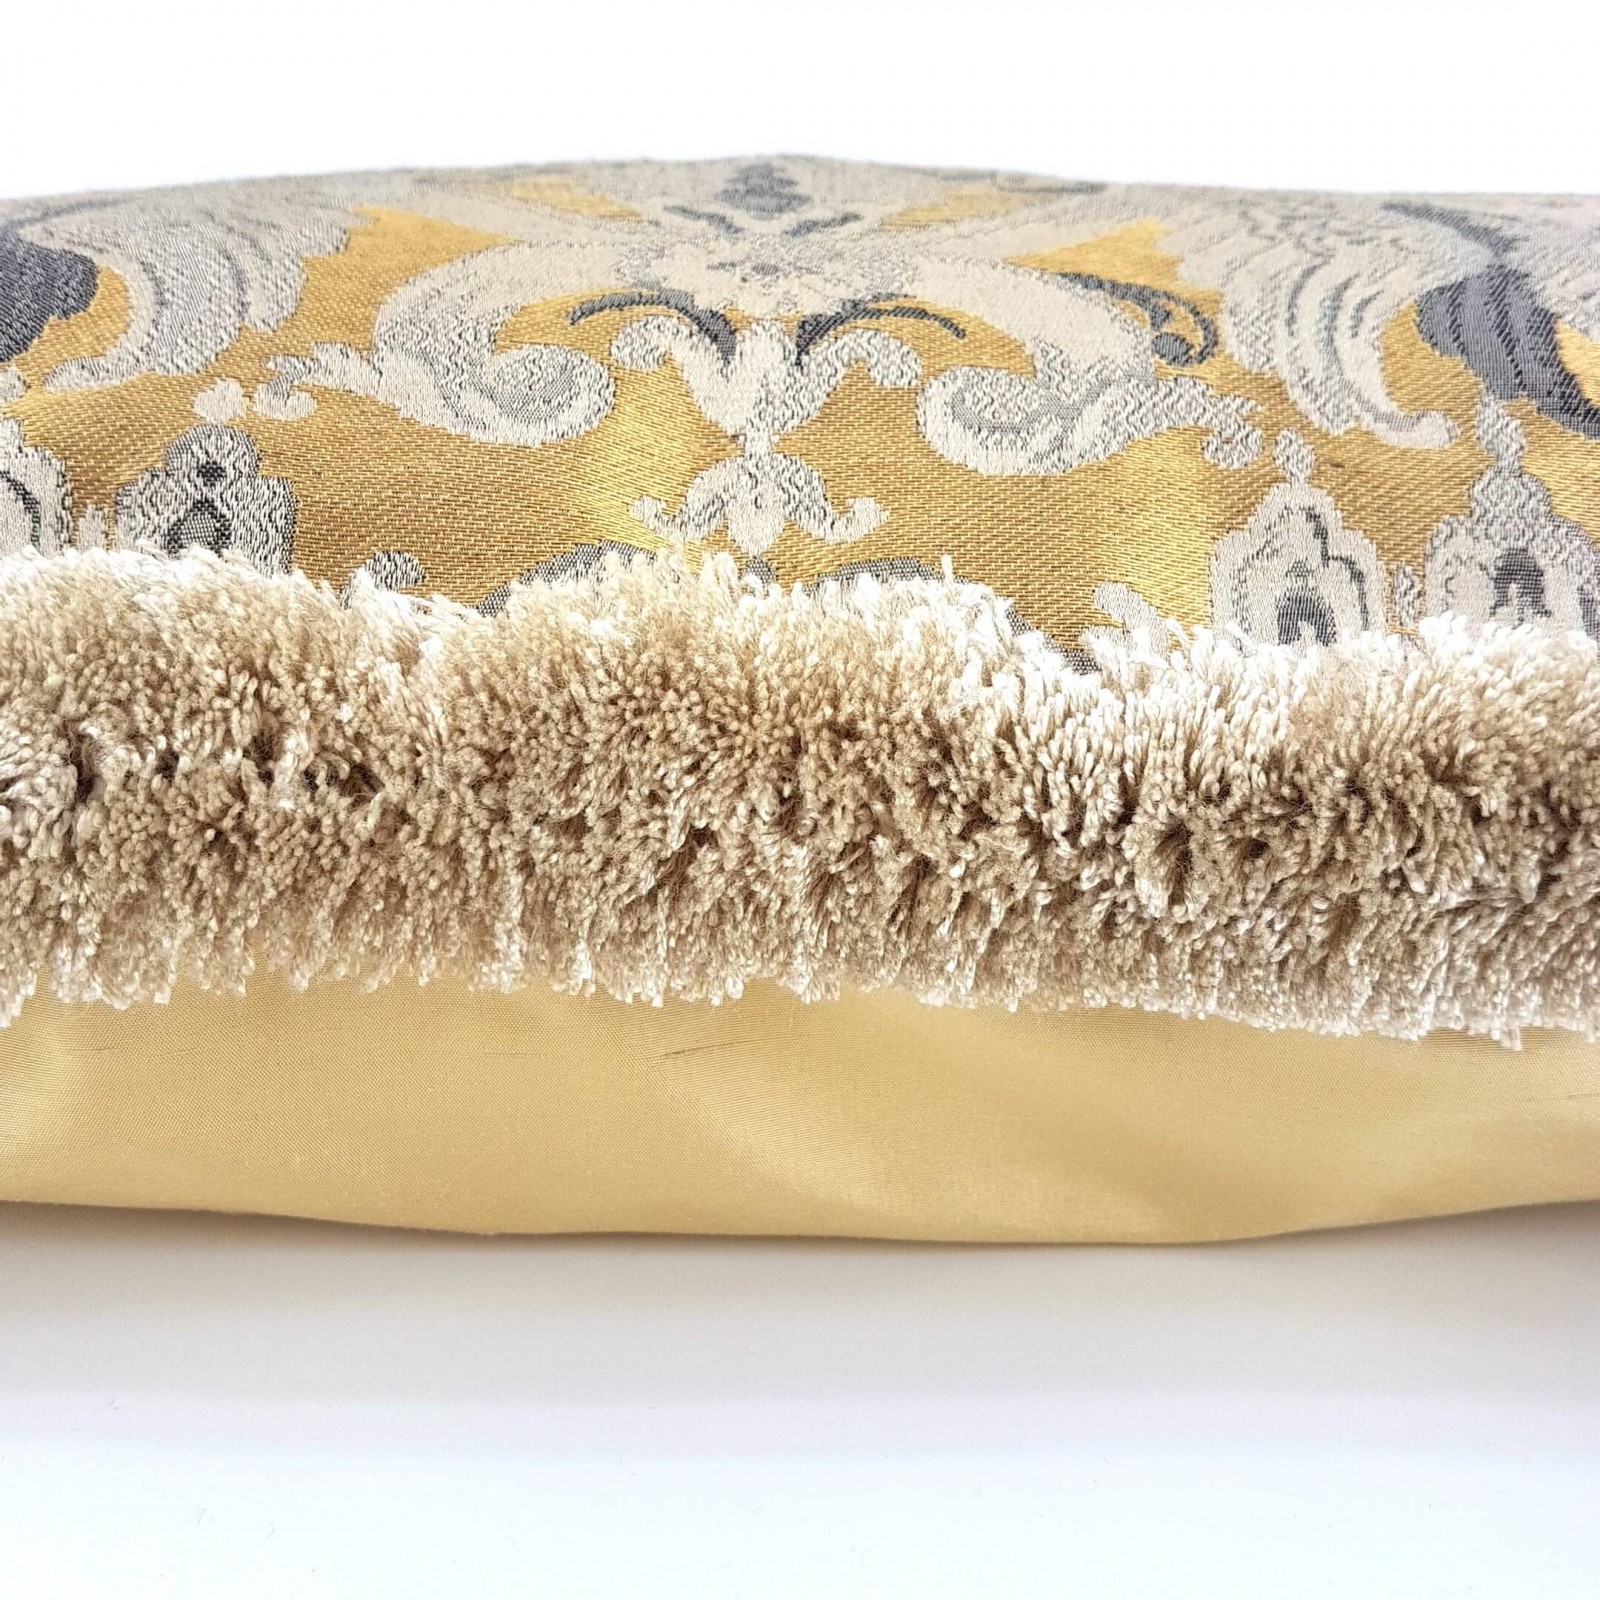 Case Silk Brocatelle Antique Brush Fringe Gold Pillow with